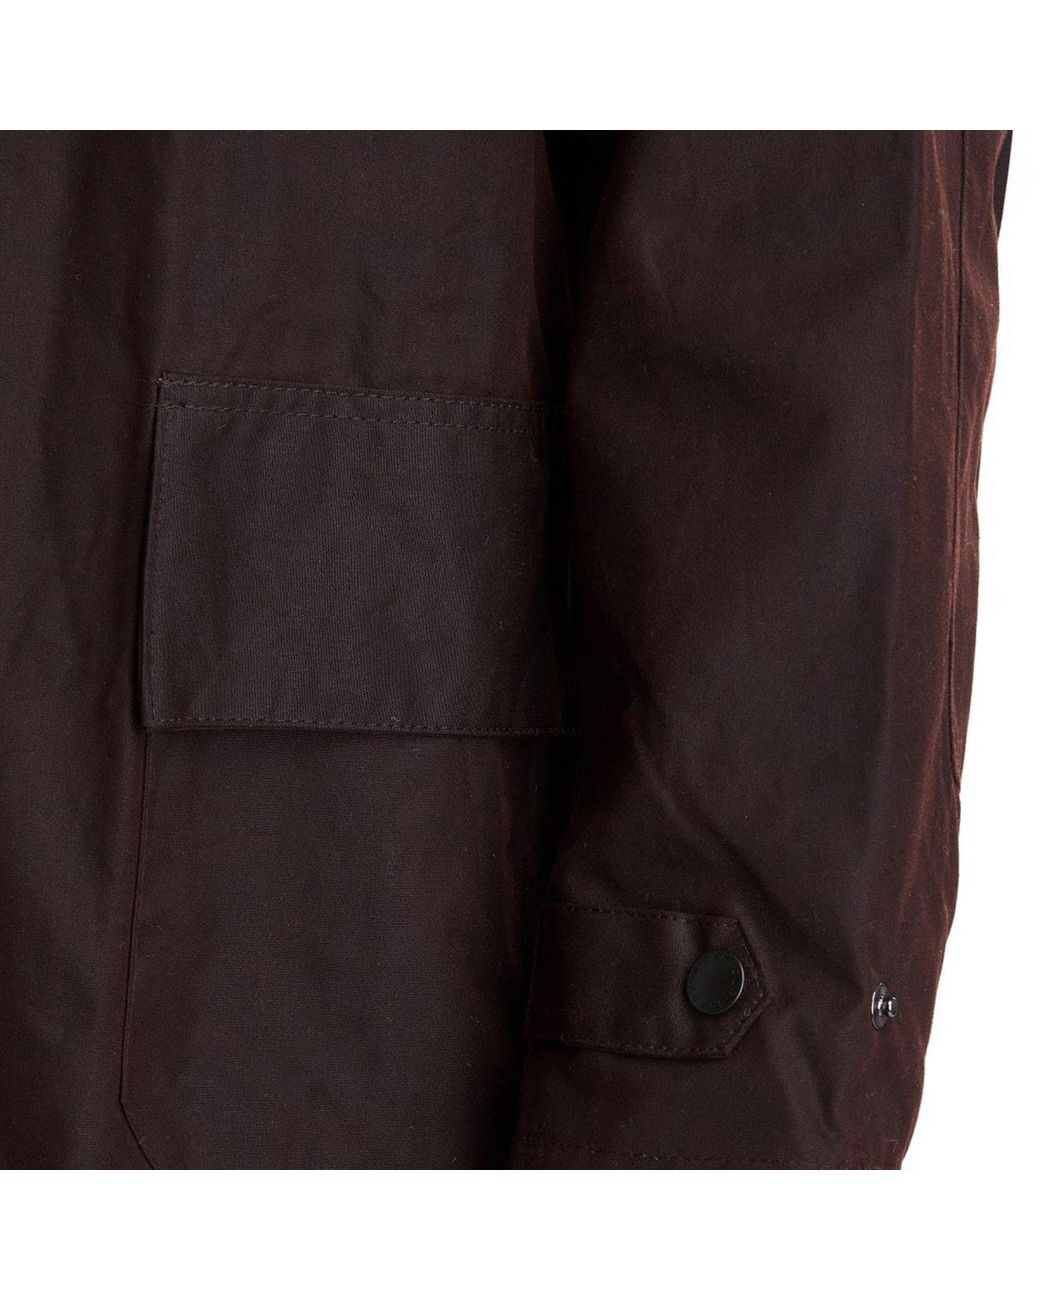 Barbour Cotton Stockman Wax Coat in Brown for Men - Save 30% | Lyst